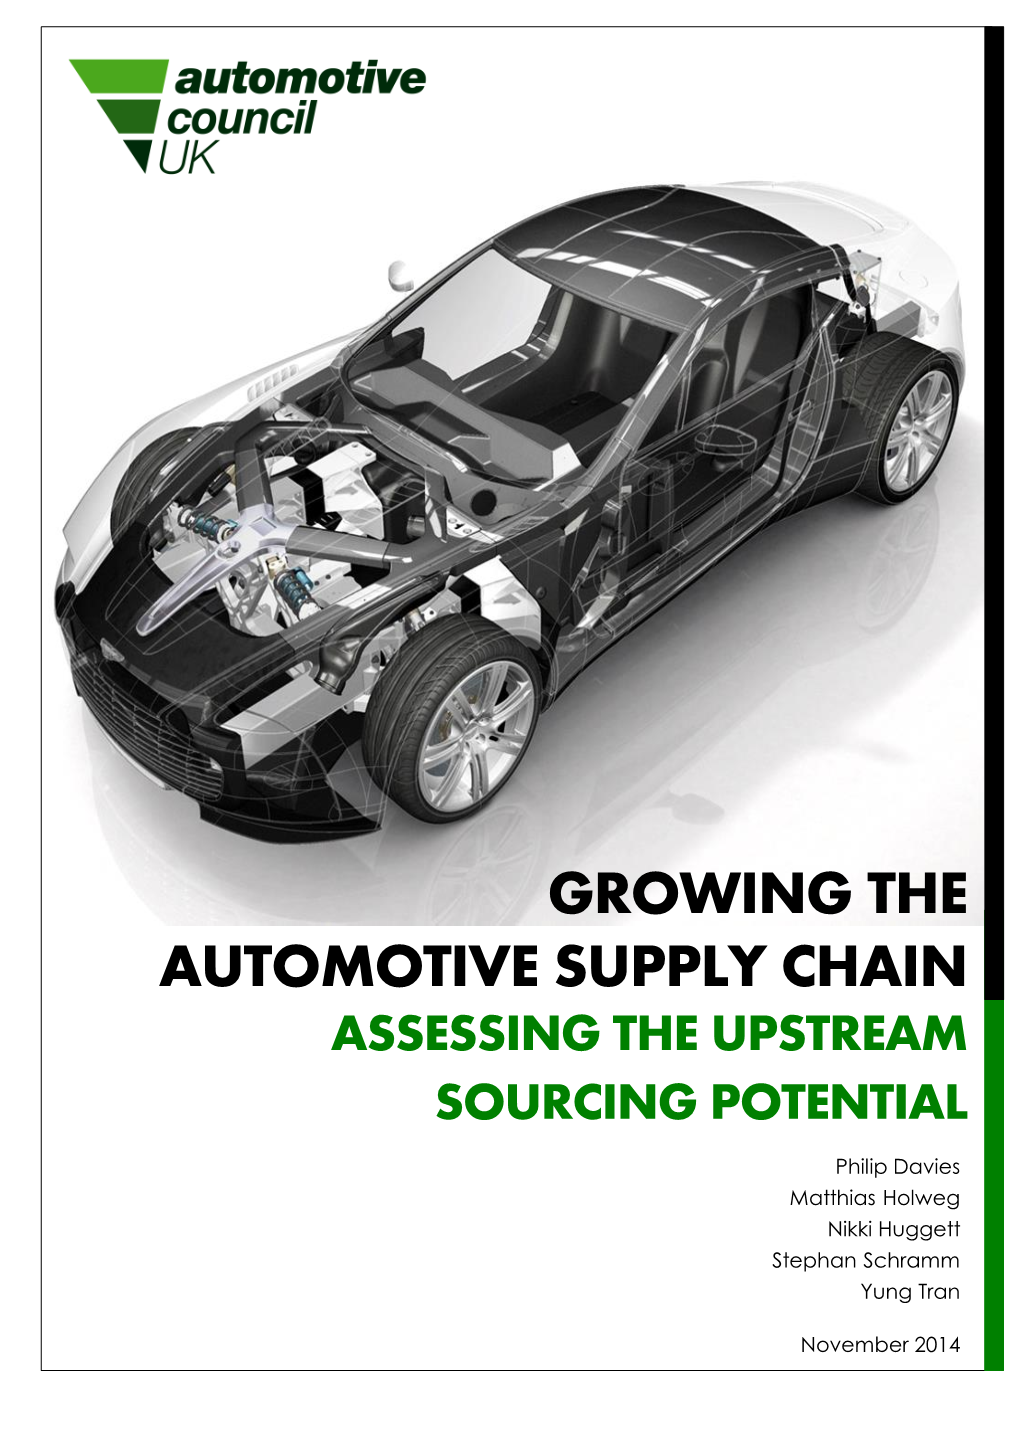 Growing the Automotive Supply Chain Assessing the Upstream Sourcing Potential